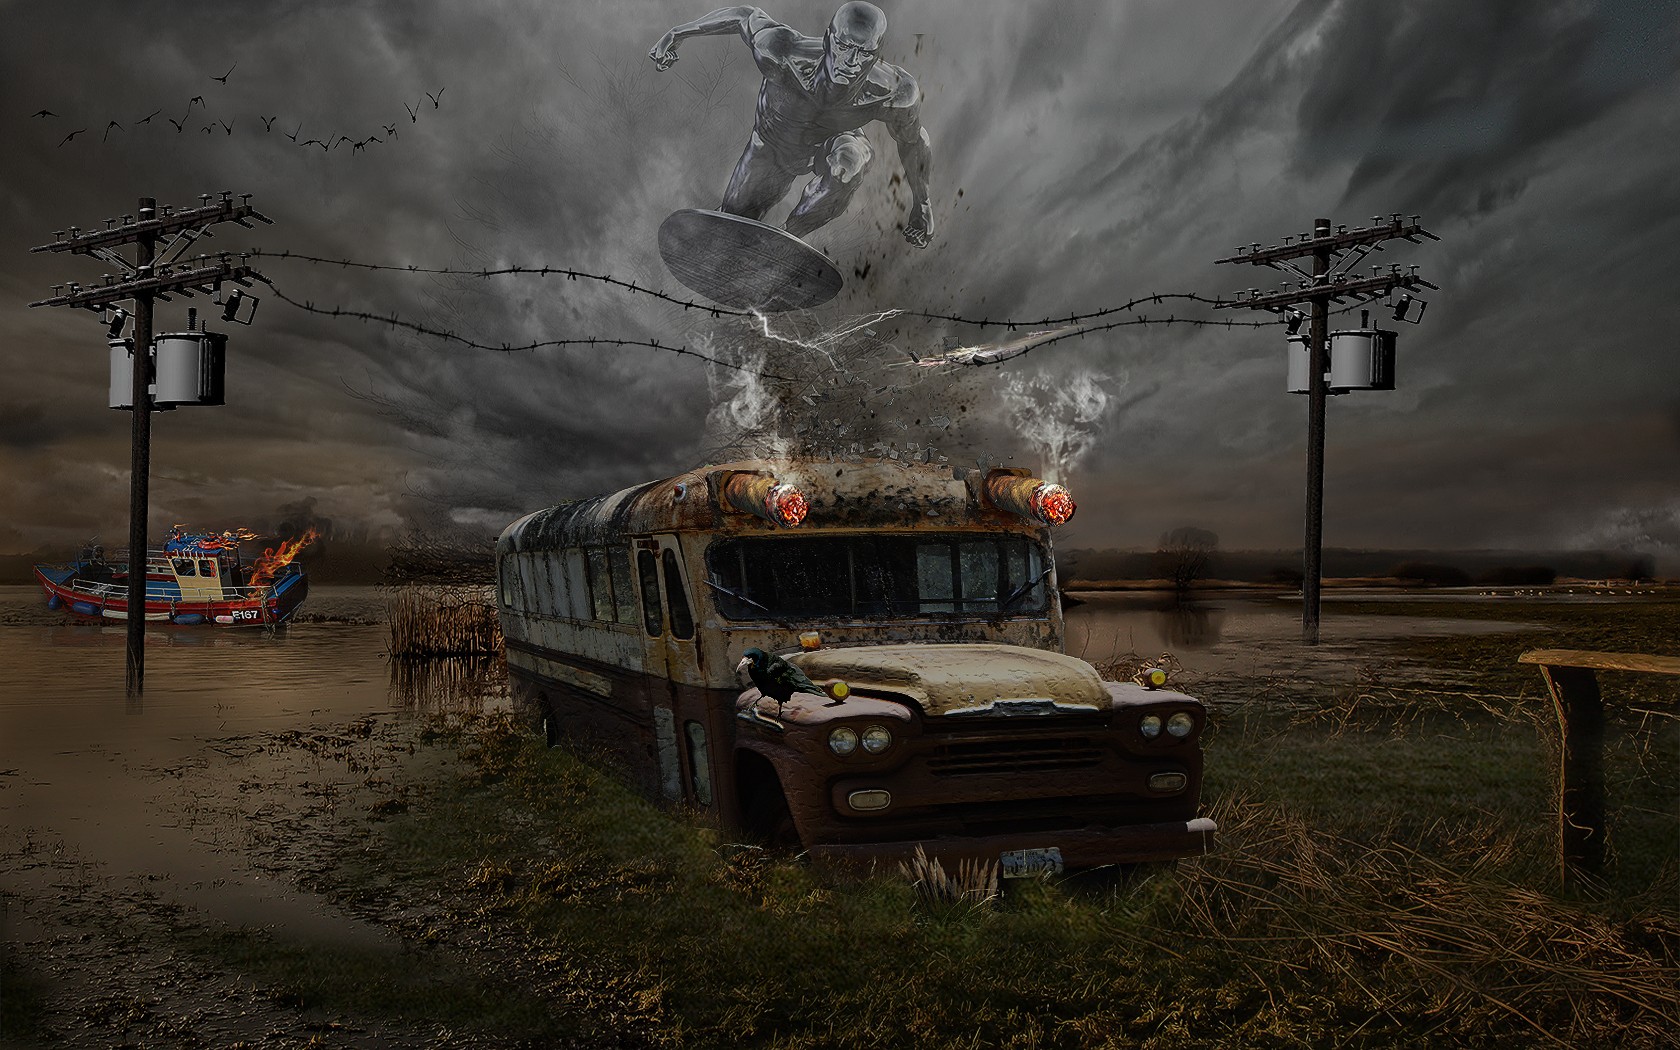 General 1680x1050 Silver Surfer buses field boat wreck digital art frontal view overcast clouds sky water crow animals school bus